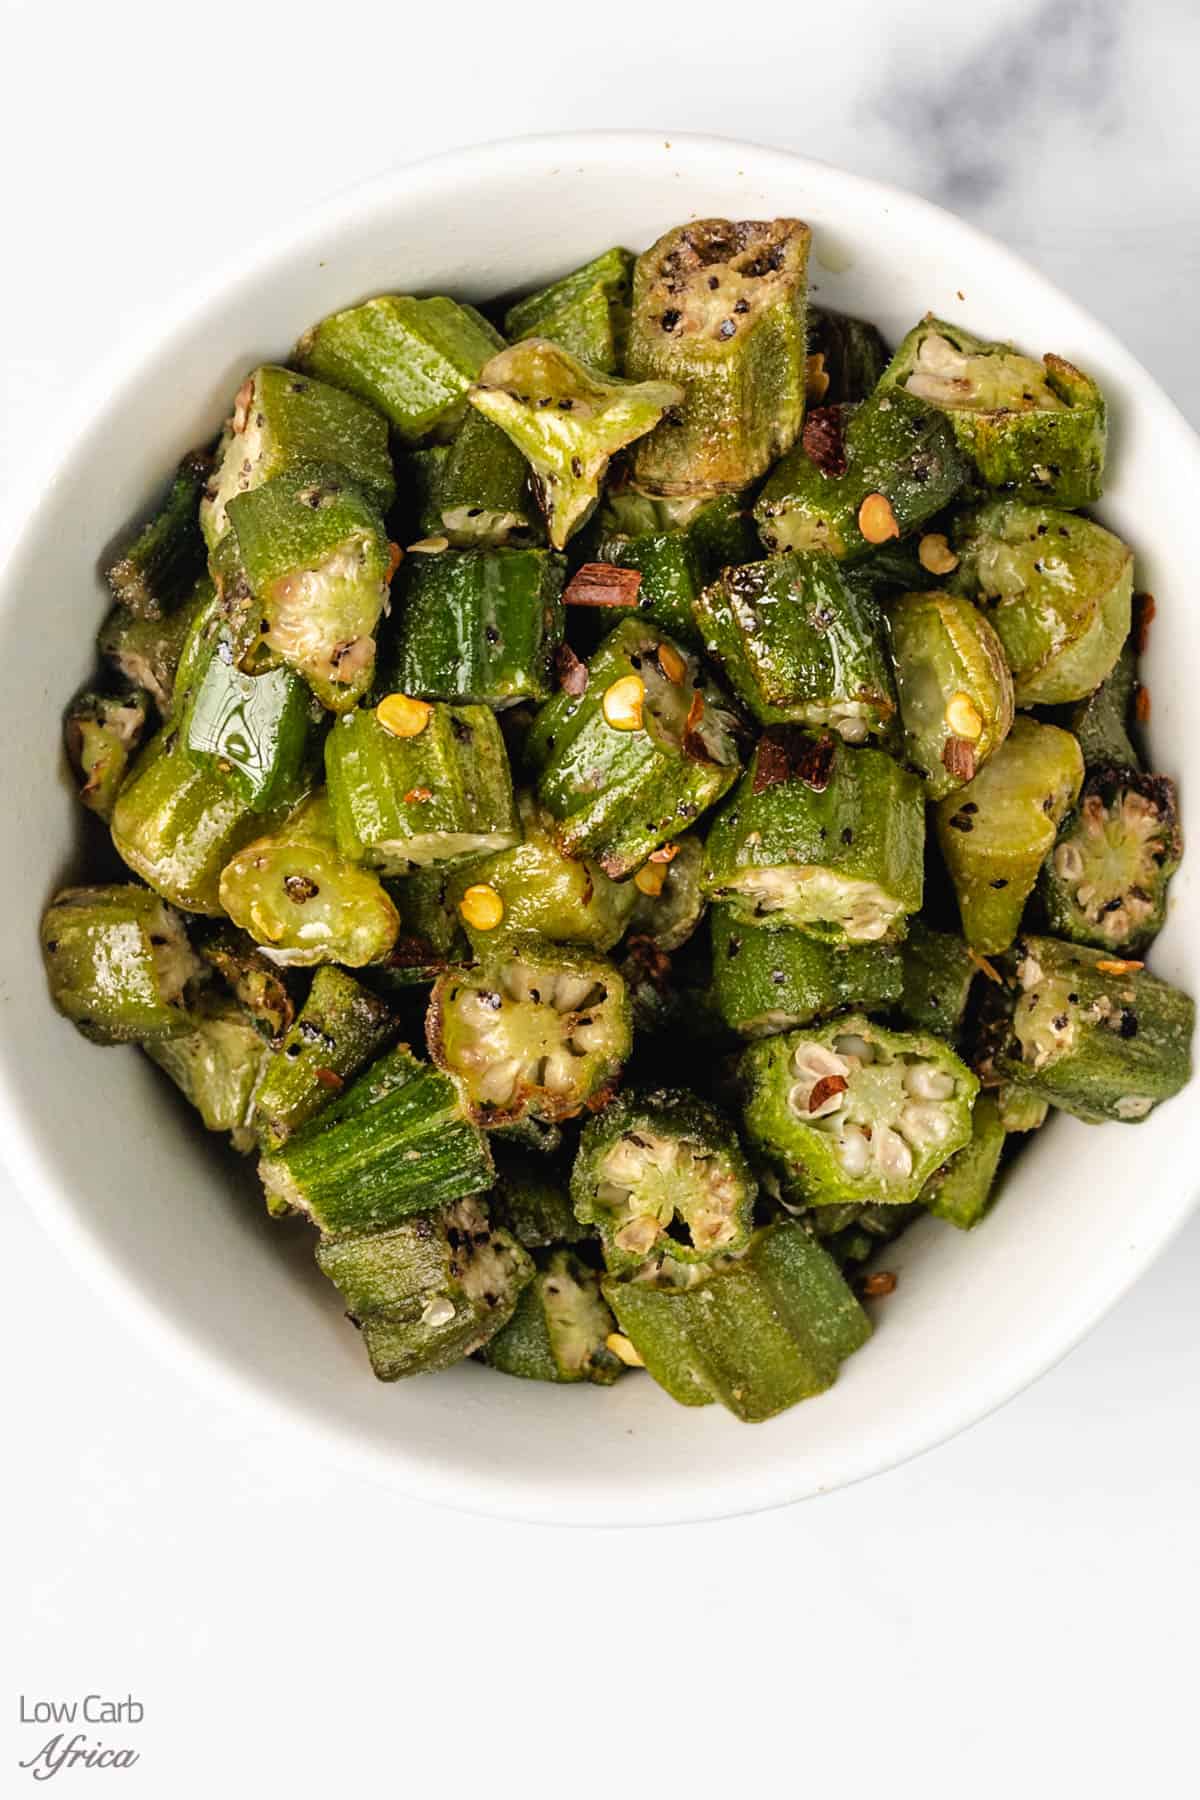 okra made in the air fryer in a white plate